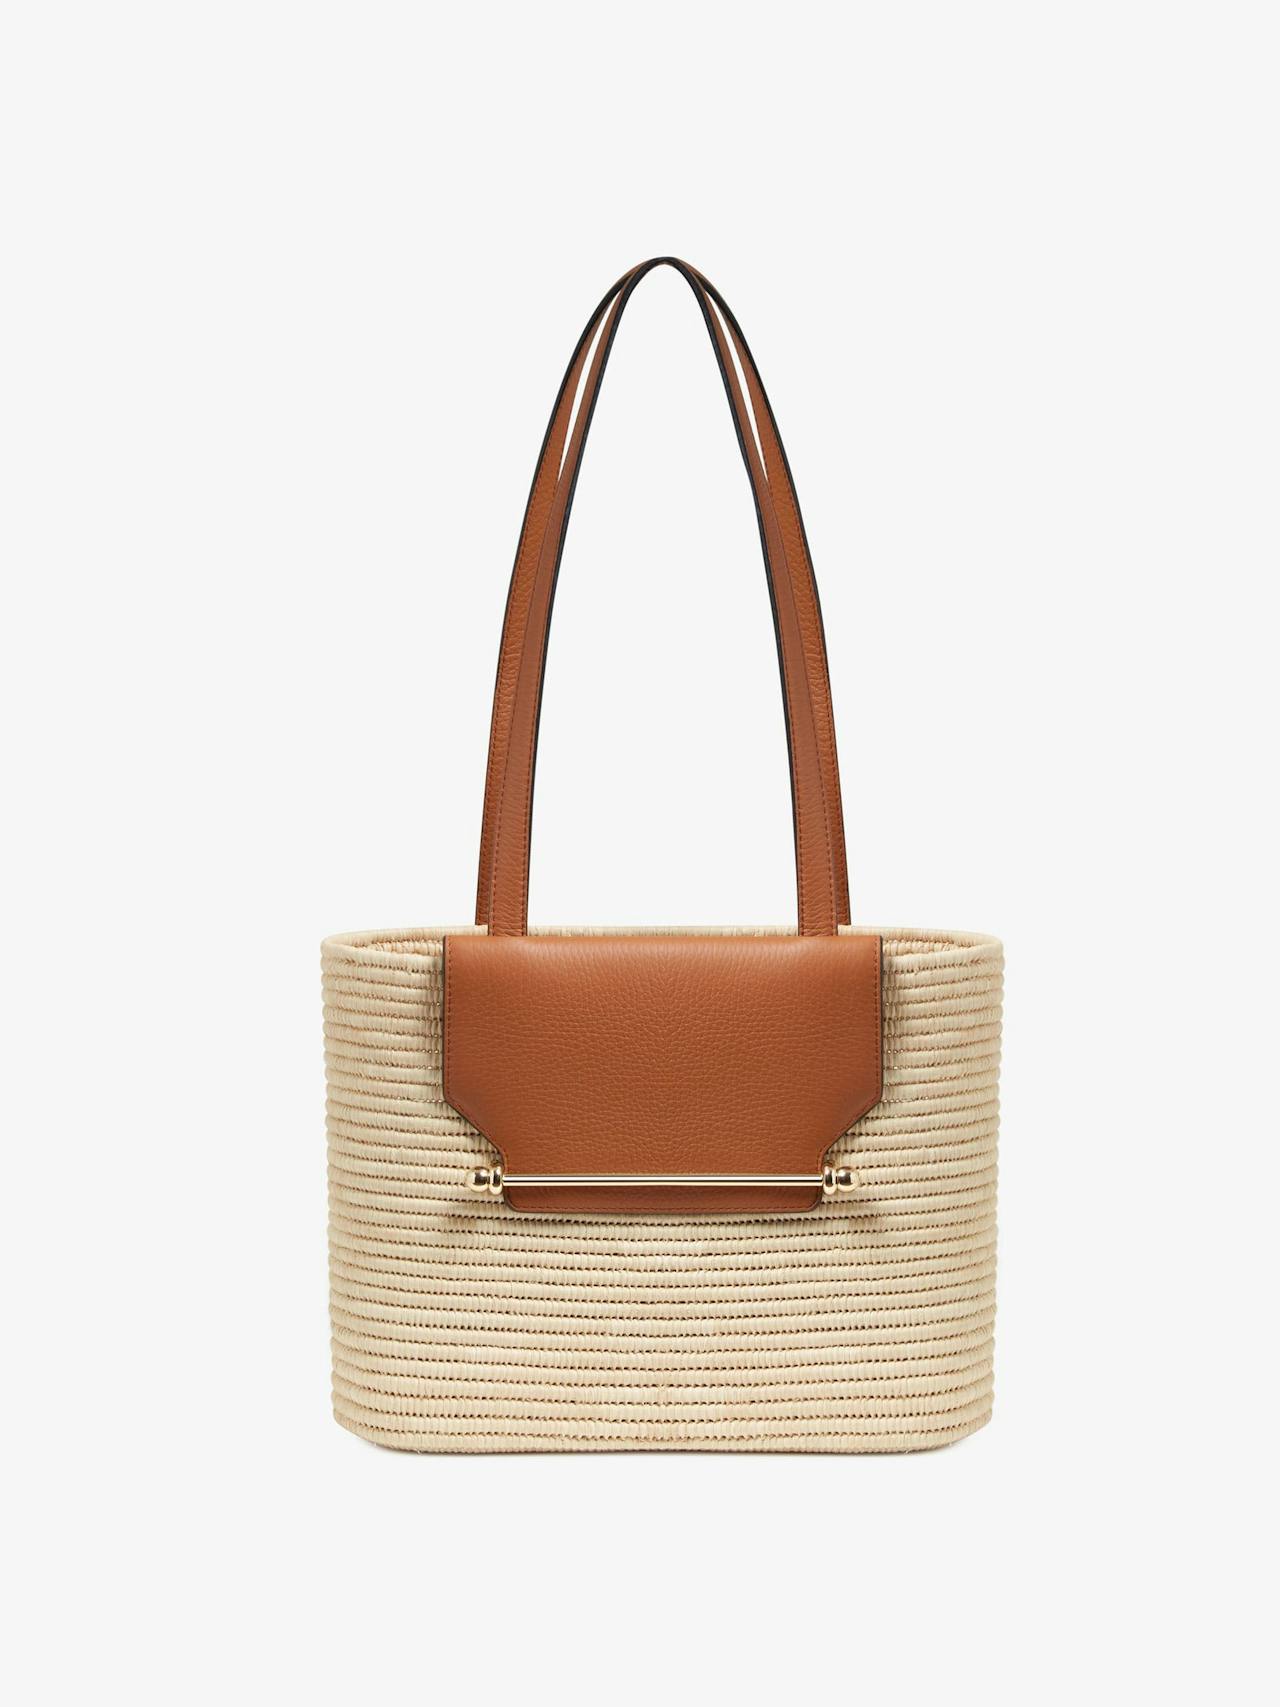 Raffia leather tan The Strathberry small basket